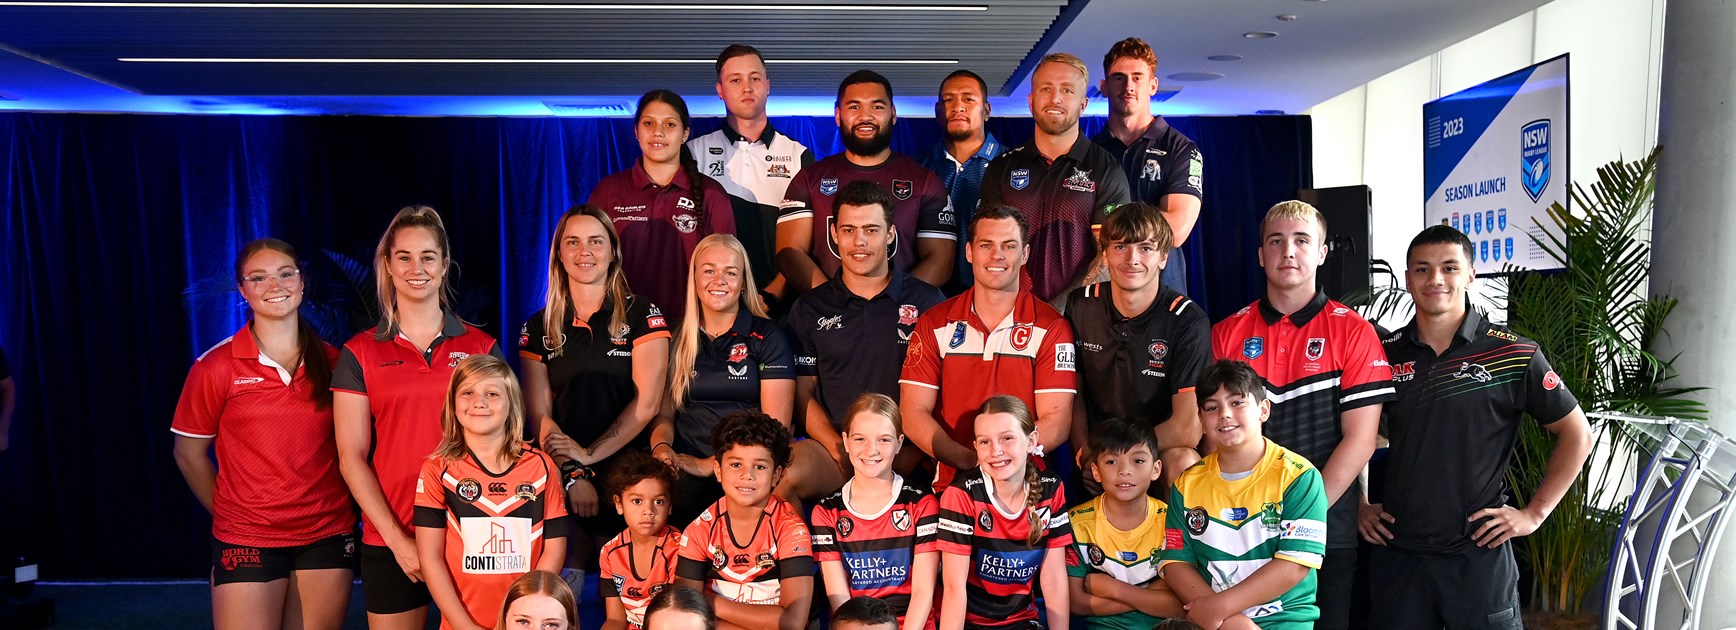 NSWRL launches 2023 season with makeshift football field